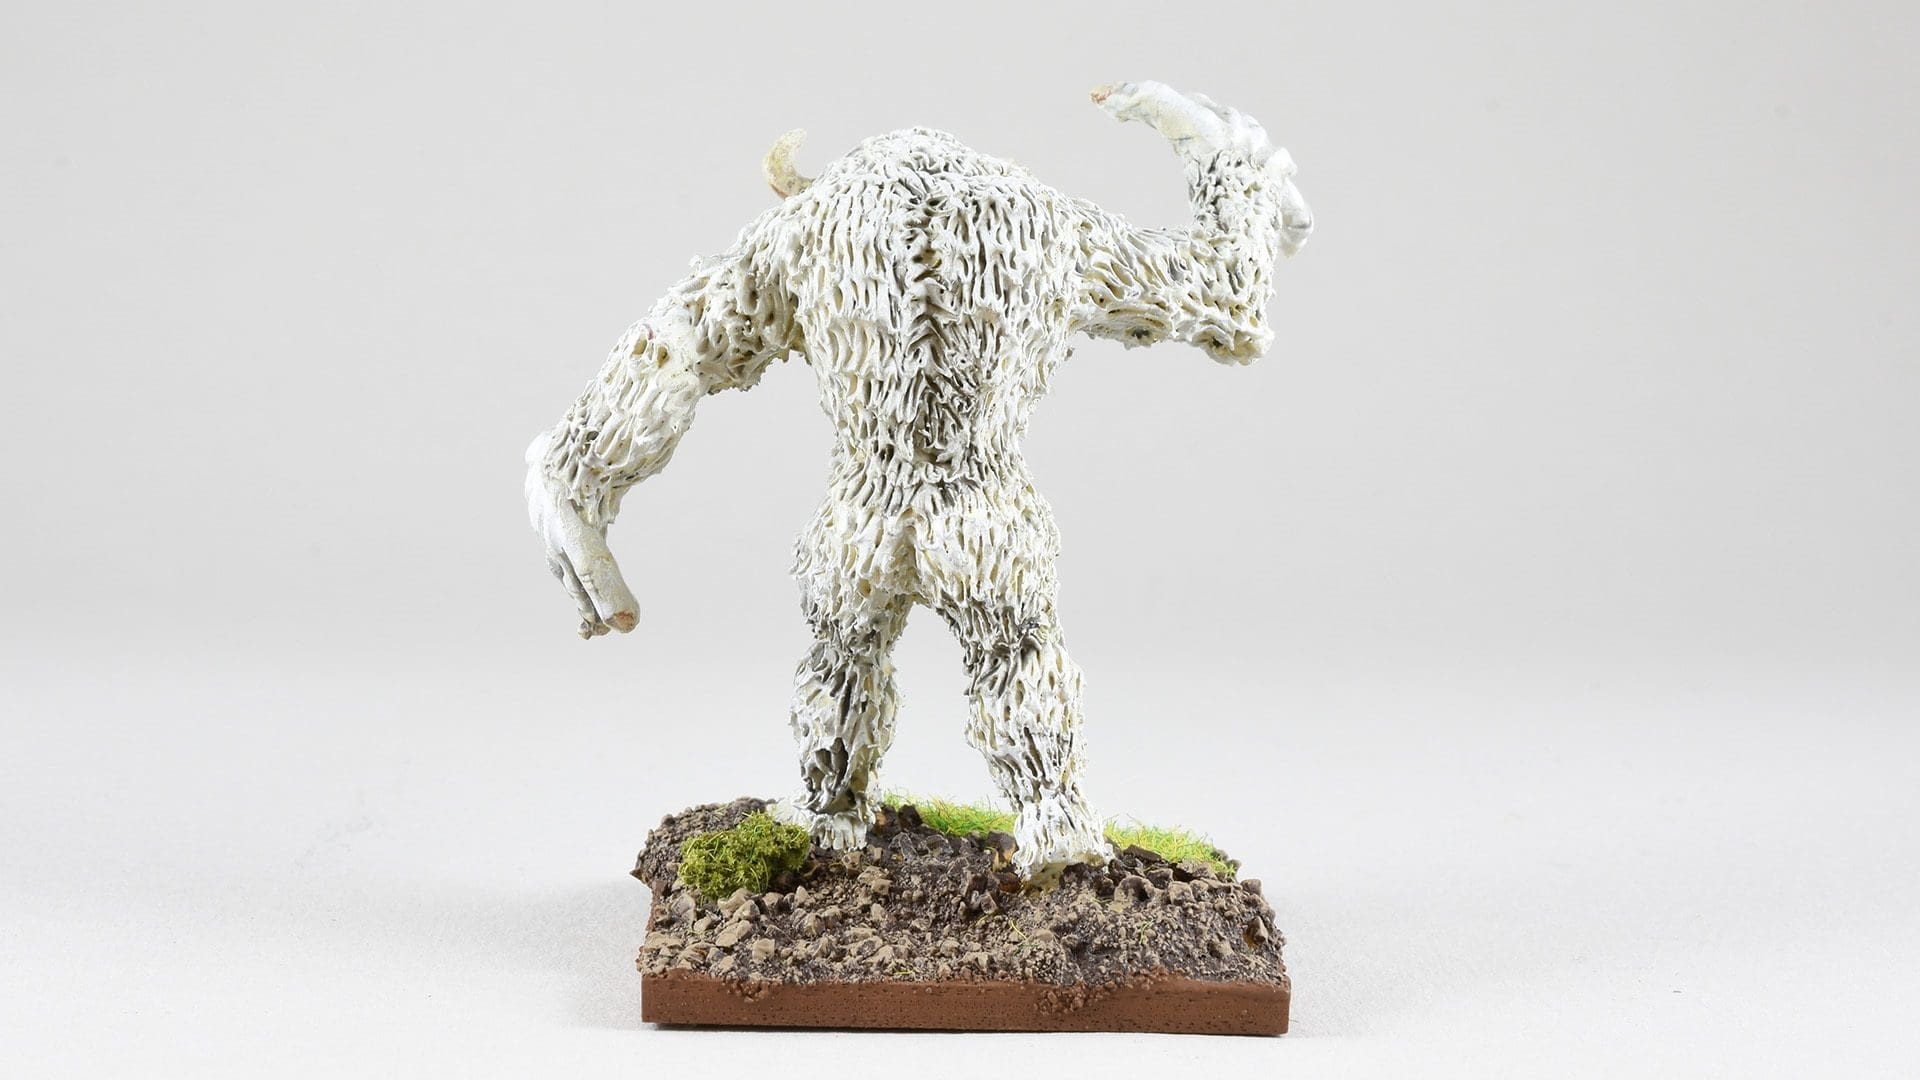 OC] I made this Yeti Miniature for an arctic encounter. If you can